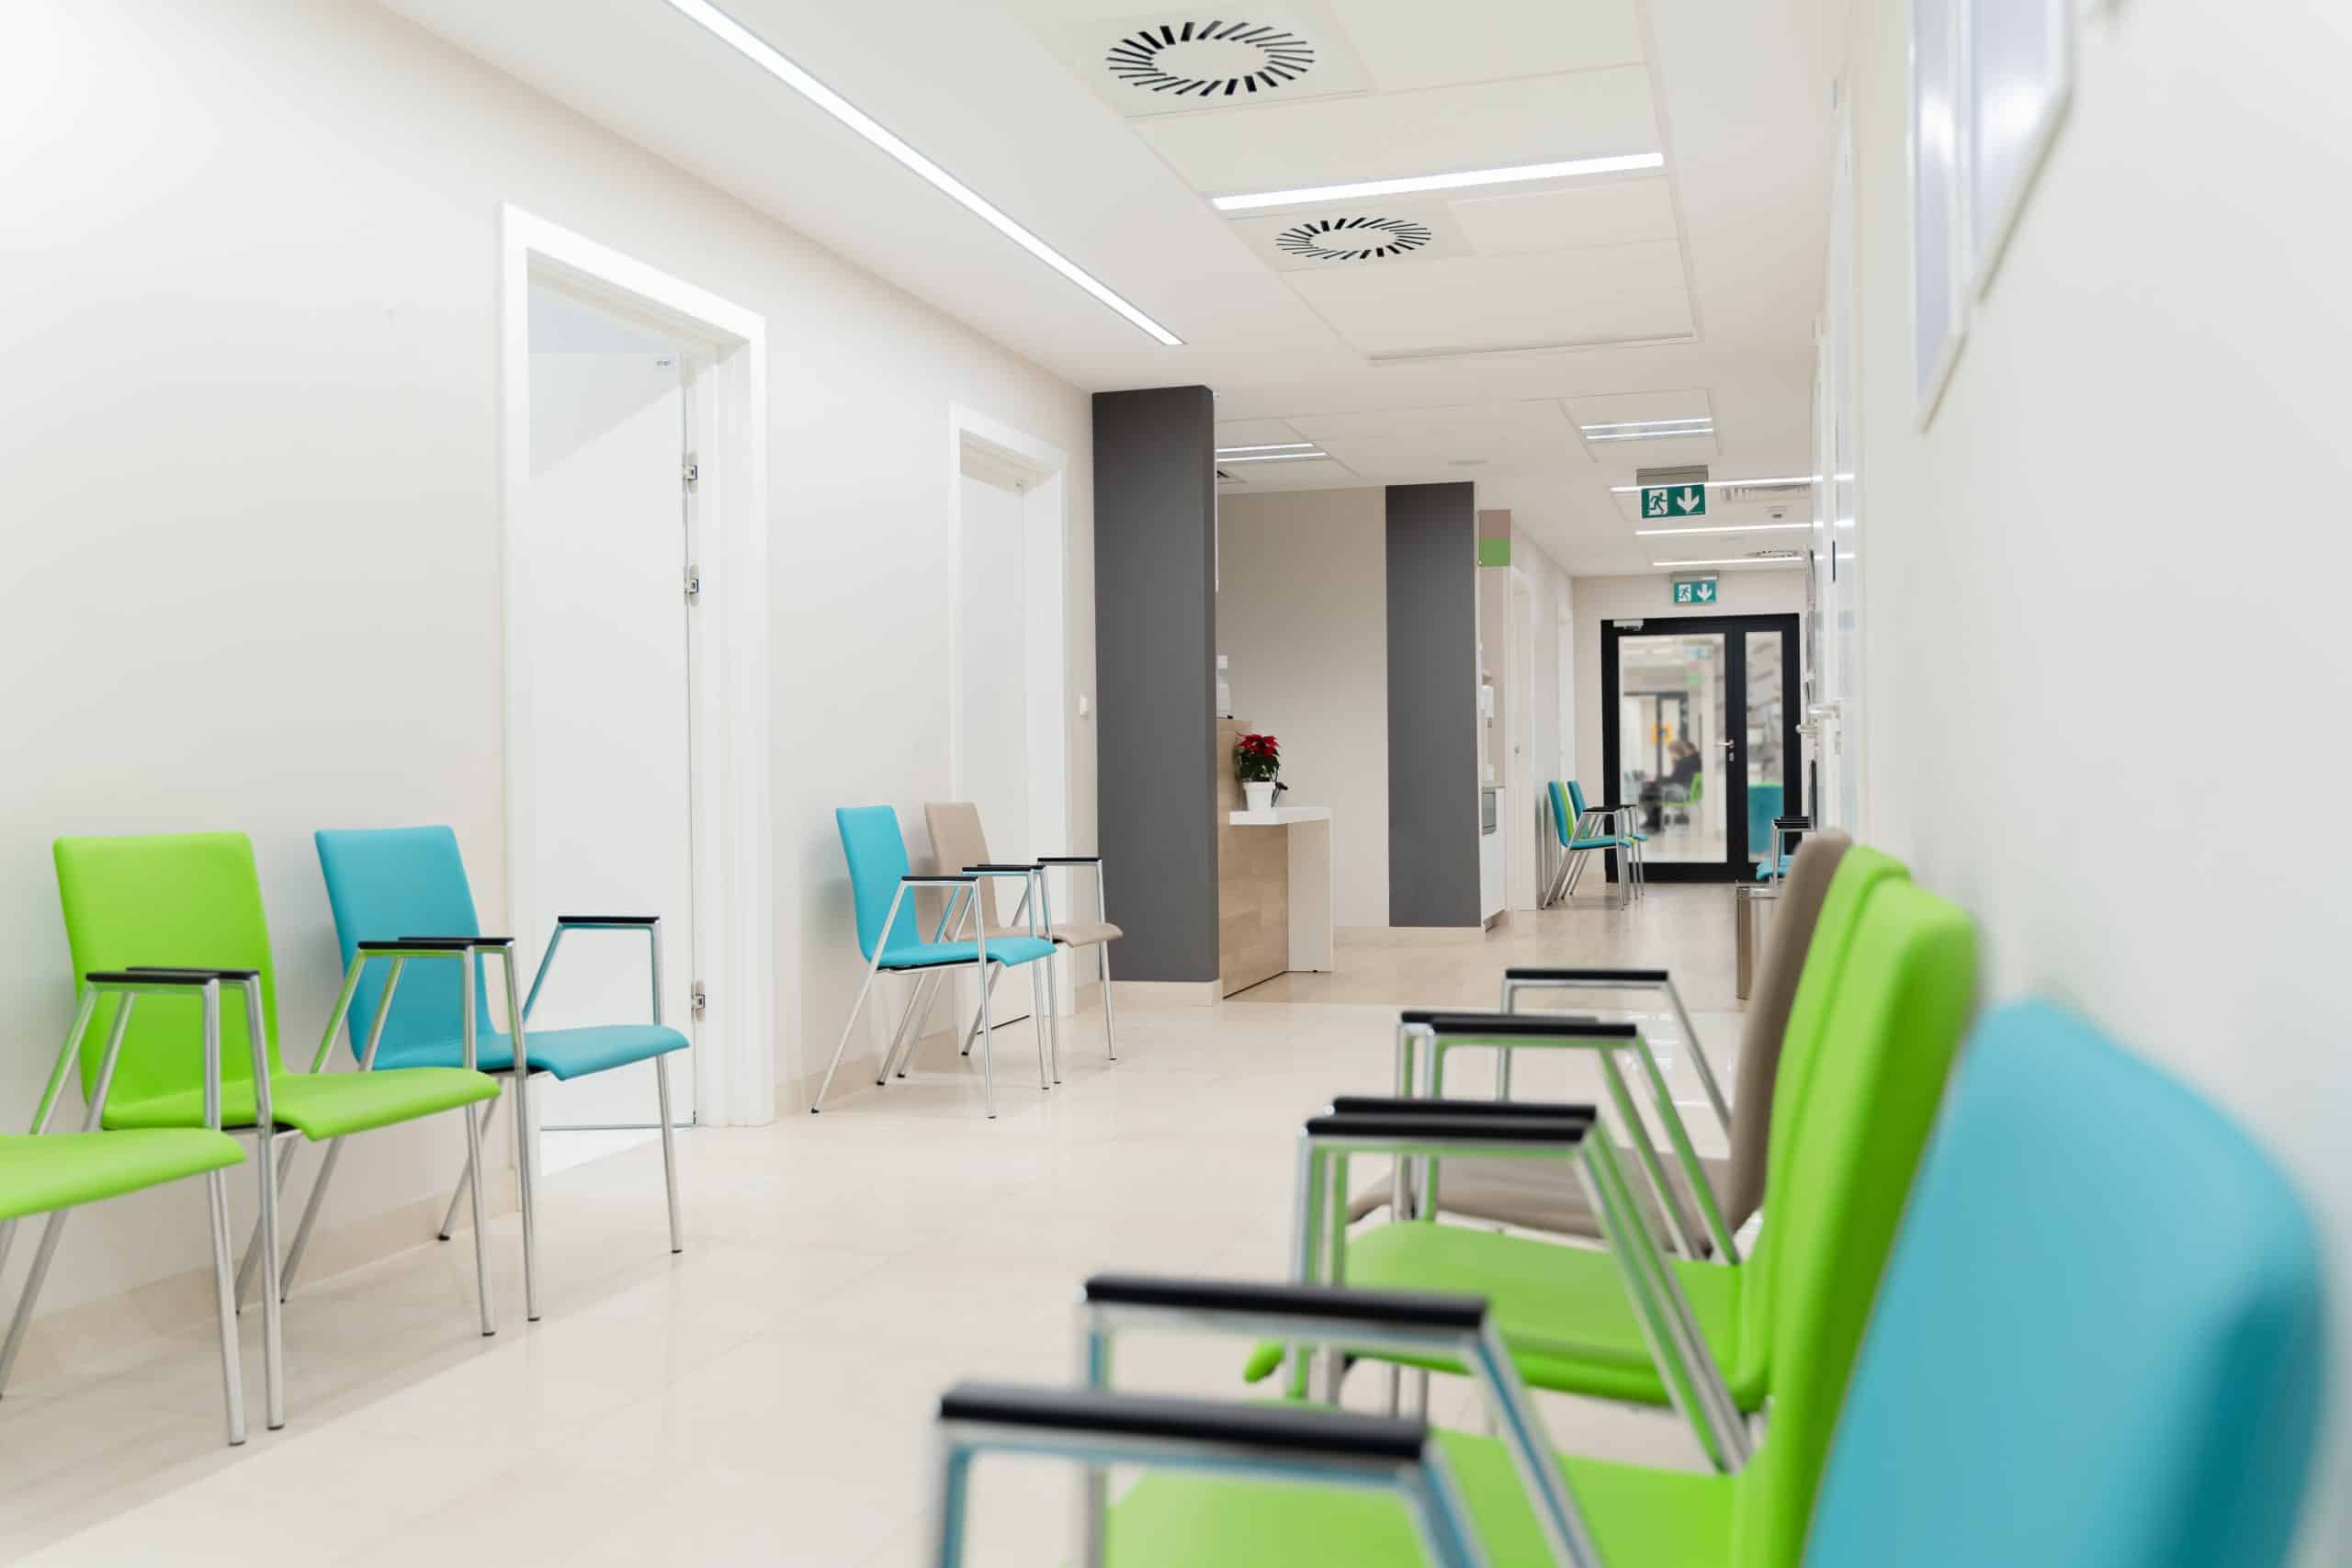 esthetic and clean modern private clinic or vet waiting room